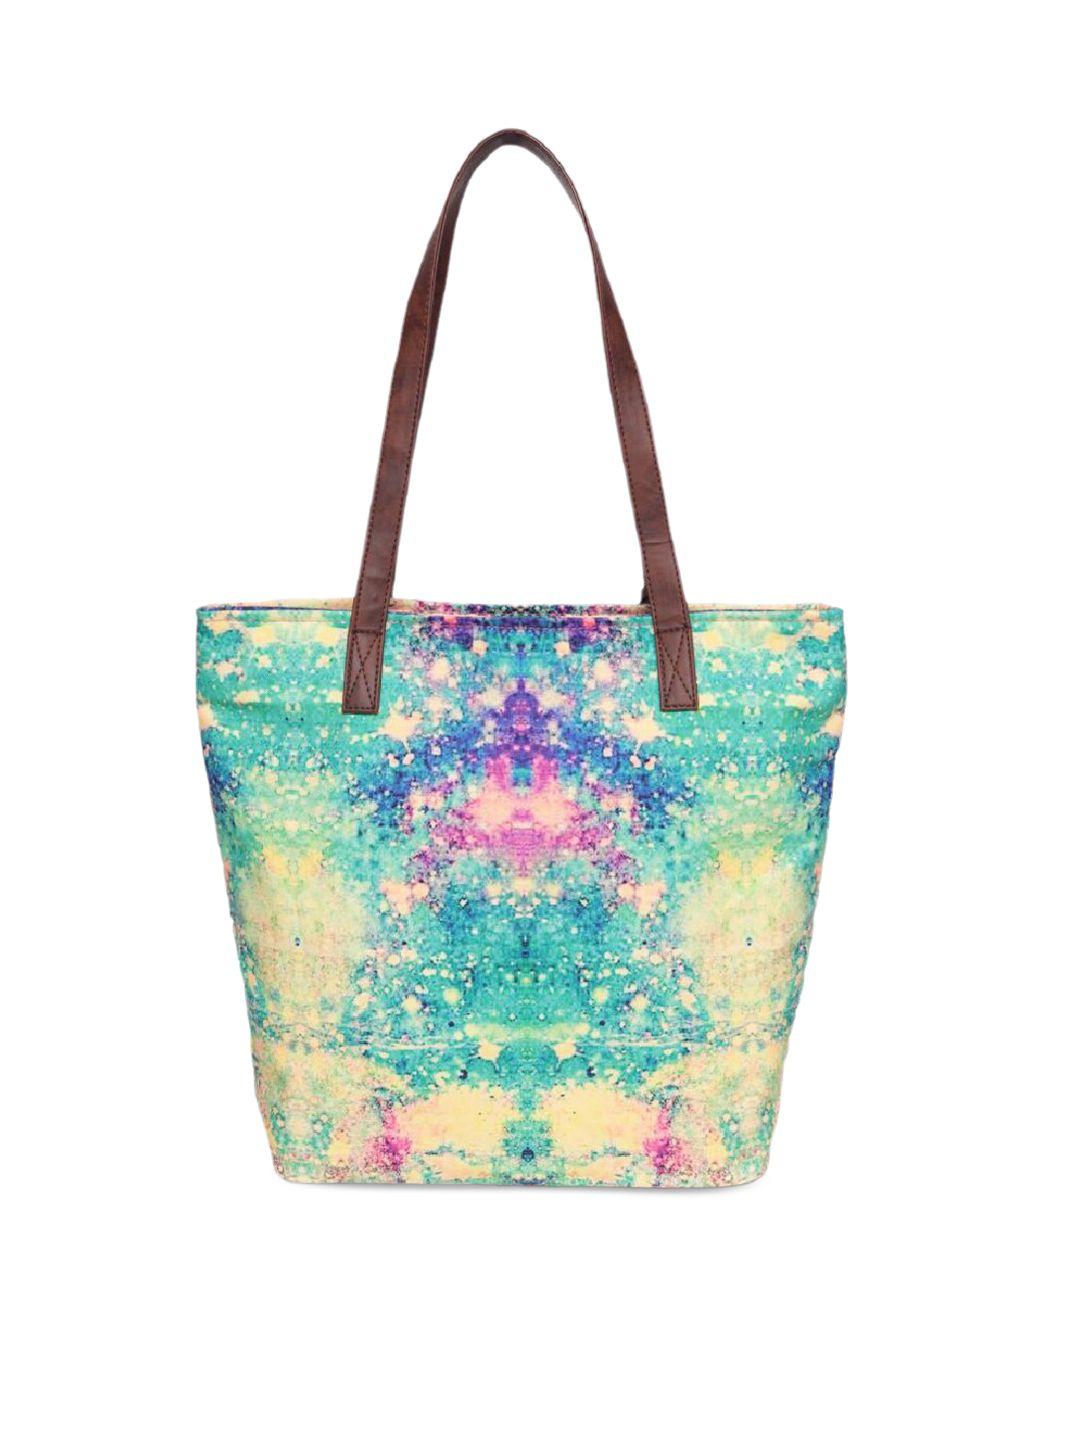 astrid green abstract printed shopper shoulder bag with tasselled